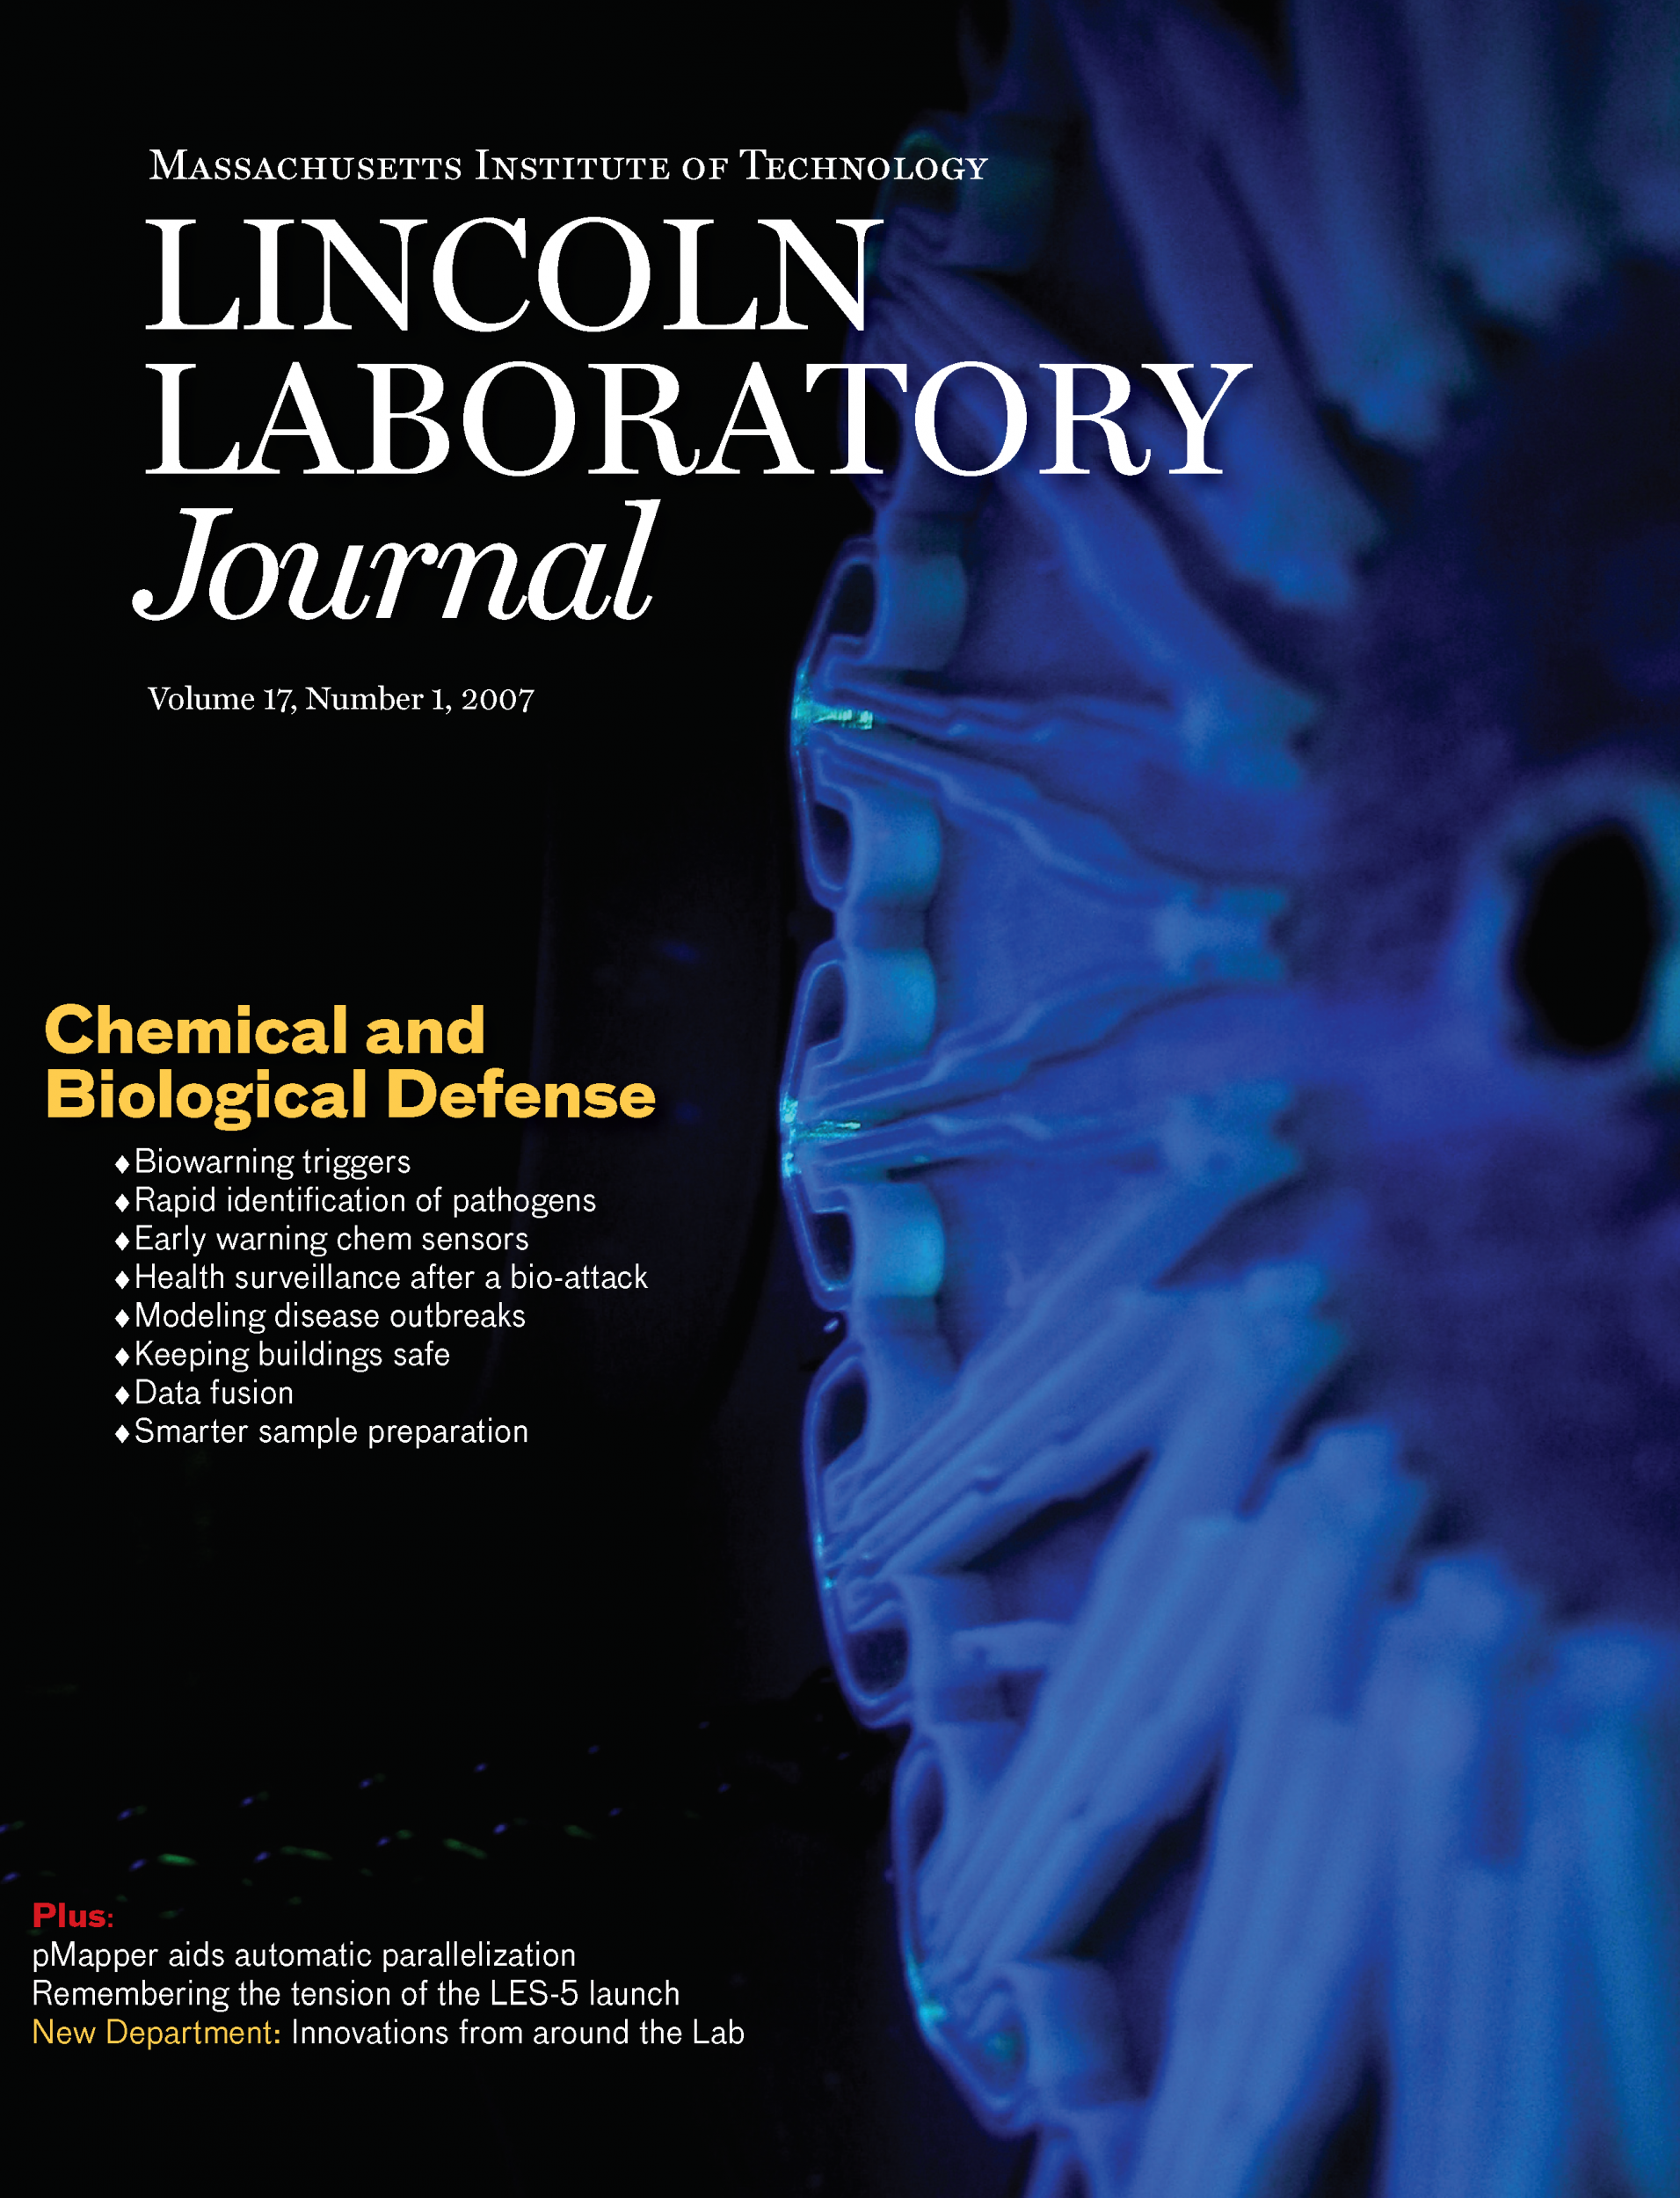 Lincoln Laboratory Journal #17 Issue 1 Cover